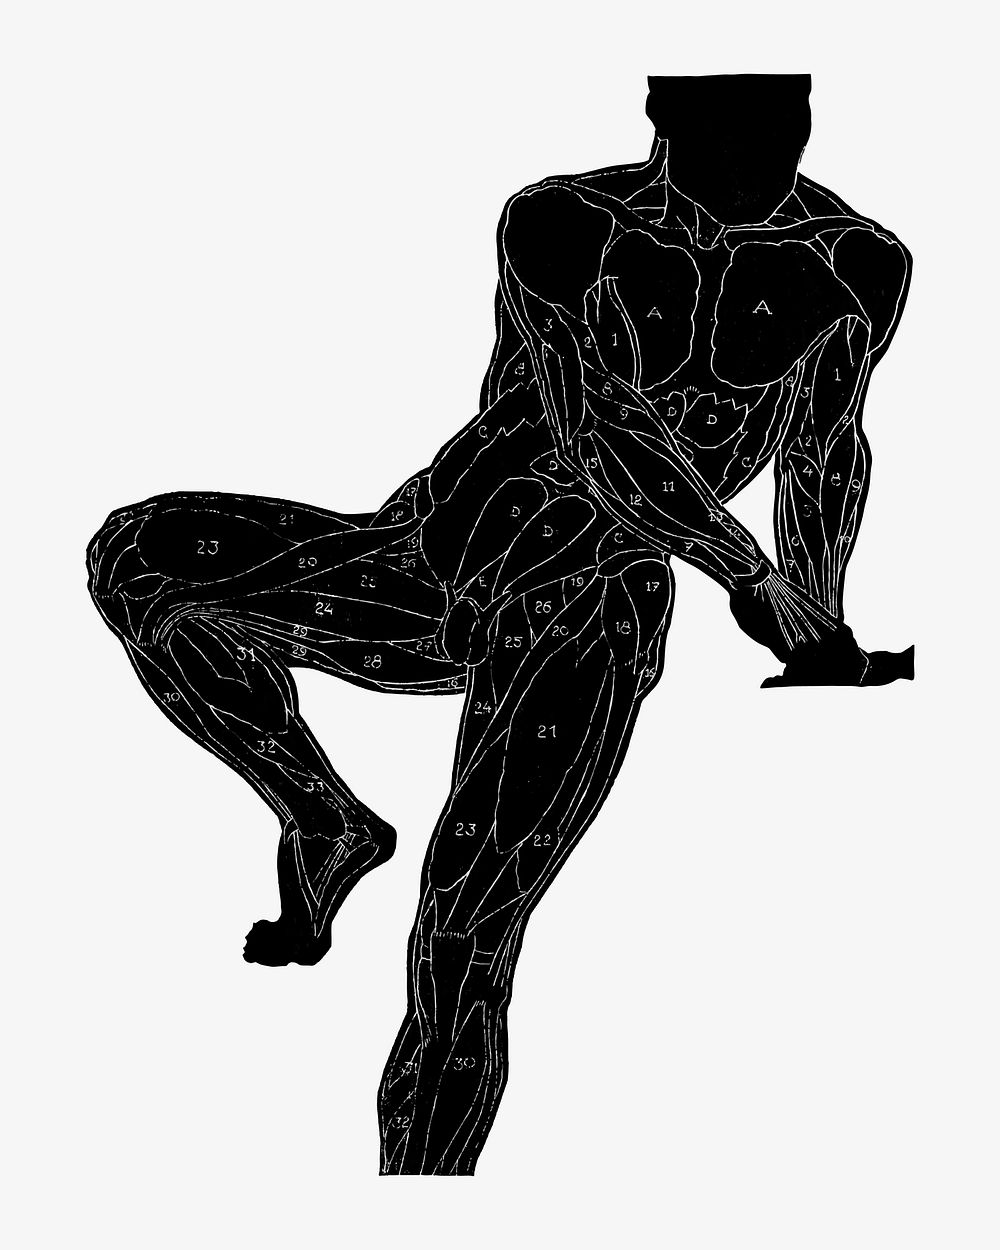 Human anatomy vector in silhouette, remixed from artworks by Reijer Stolk